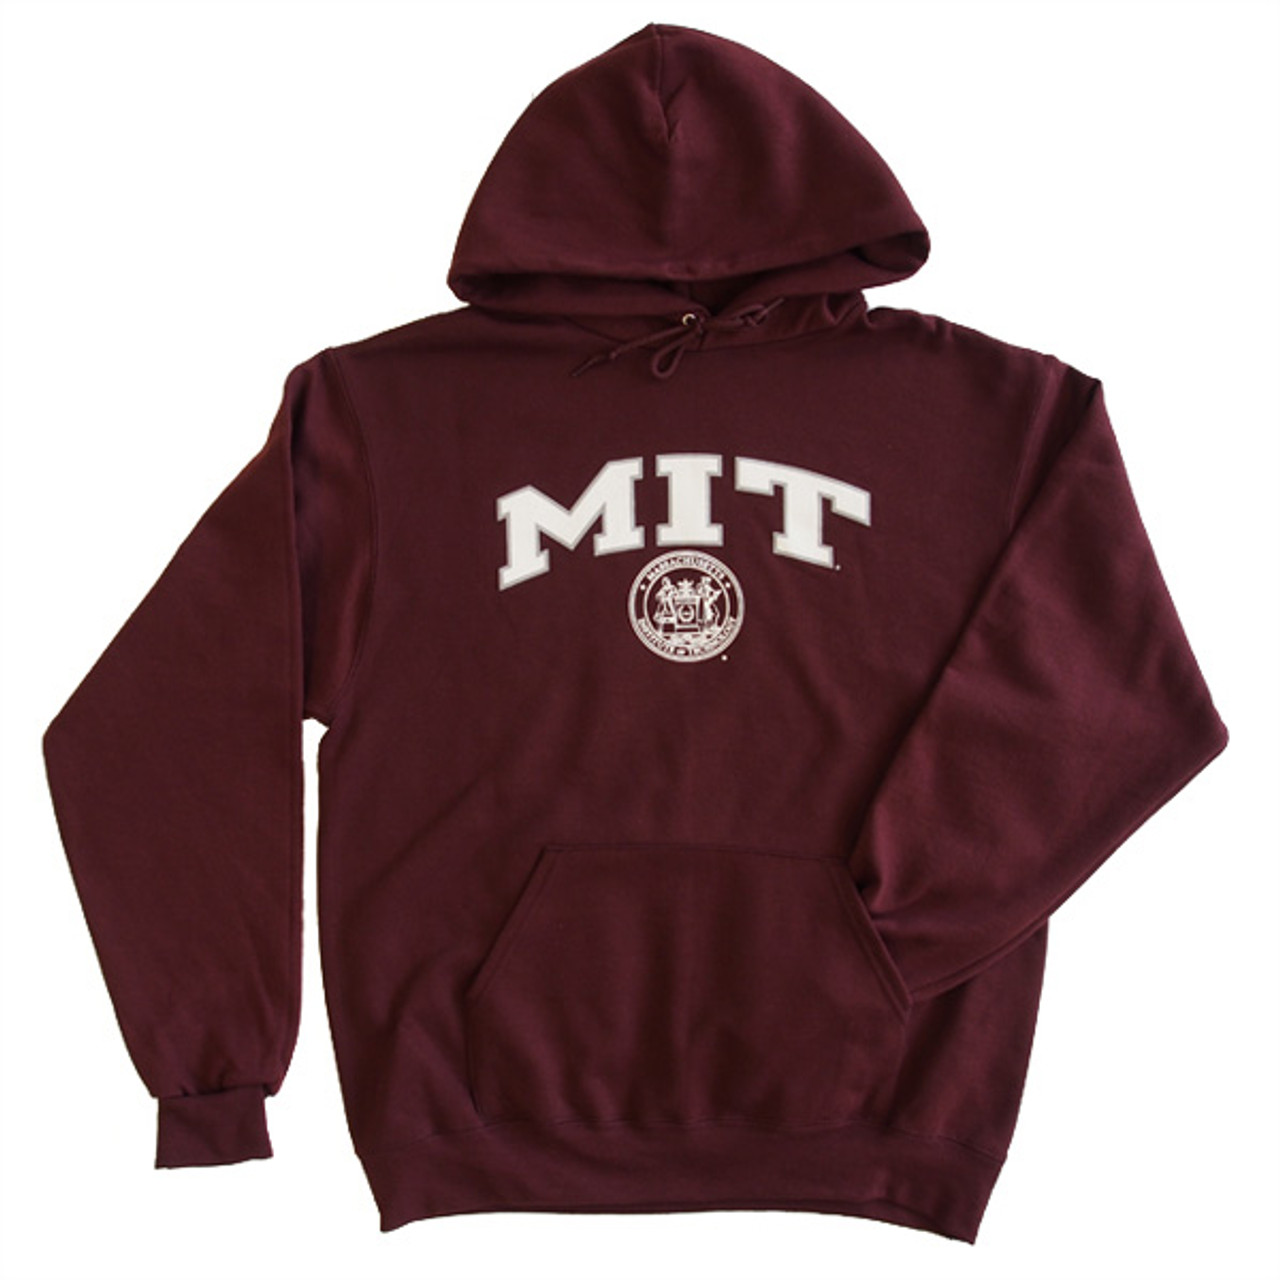 MIT hoodie with logo and seal